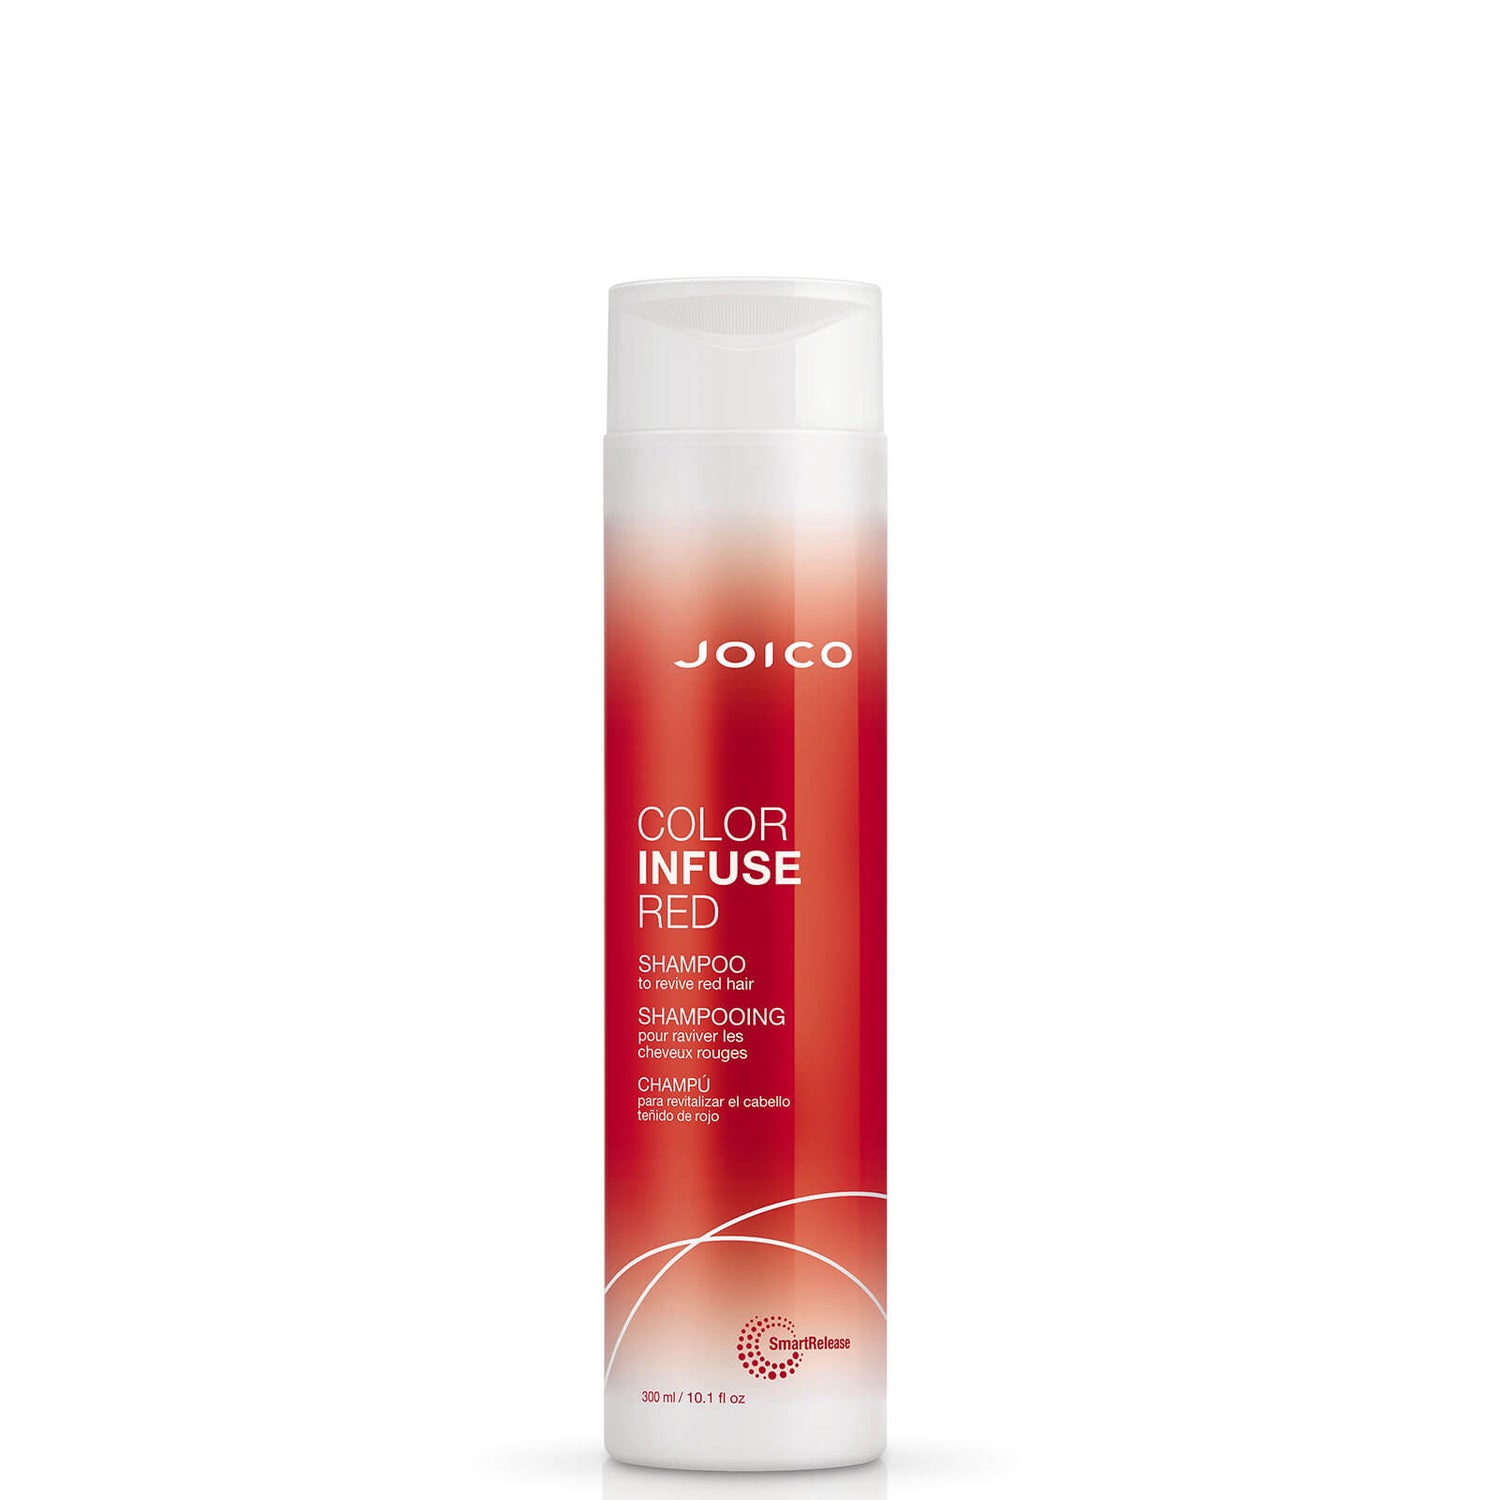 Joico Color Infuse Shampoo für rote Haare 300ml